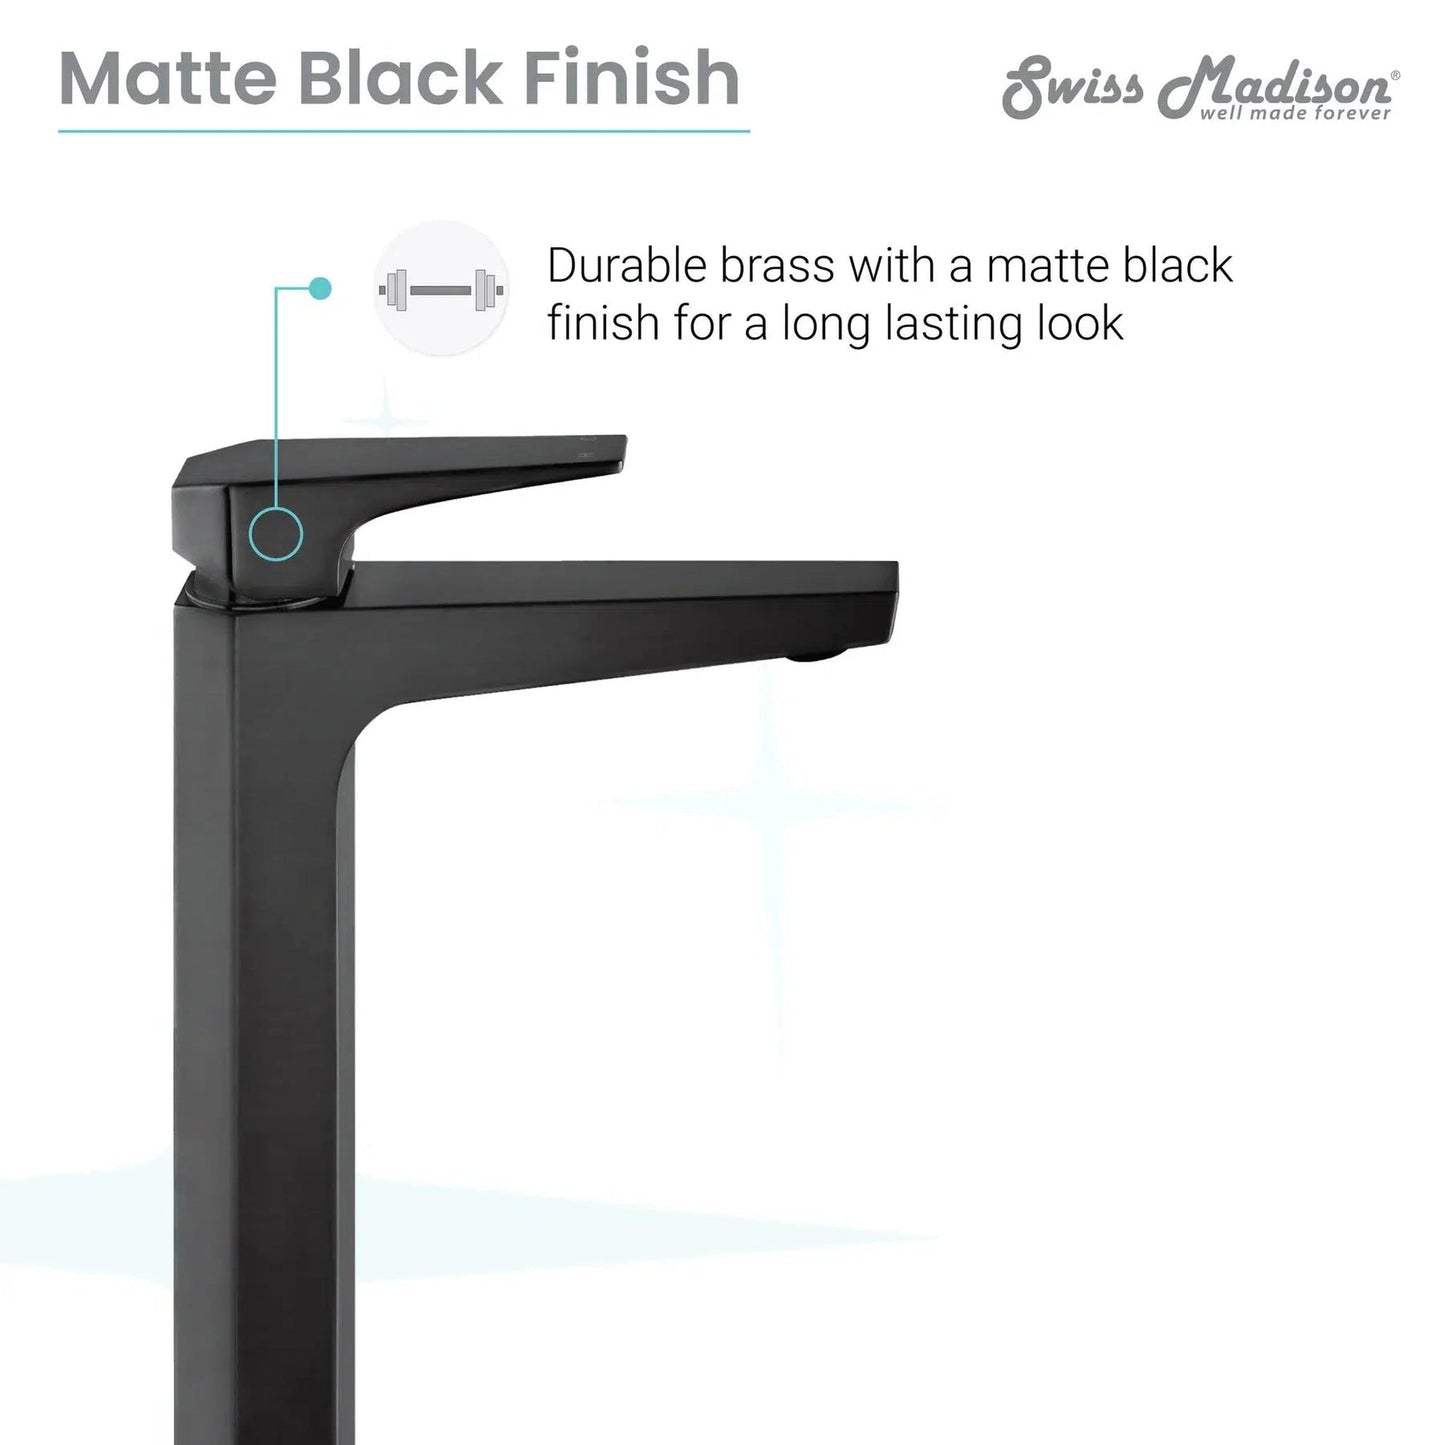 Swiss Madison Voltaire 11" Matte Black Single Hole Bathroom Faucet With Flow Rate of 1.5 GPM